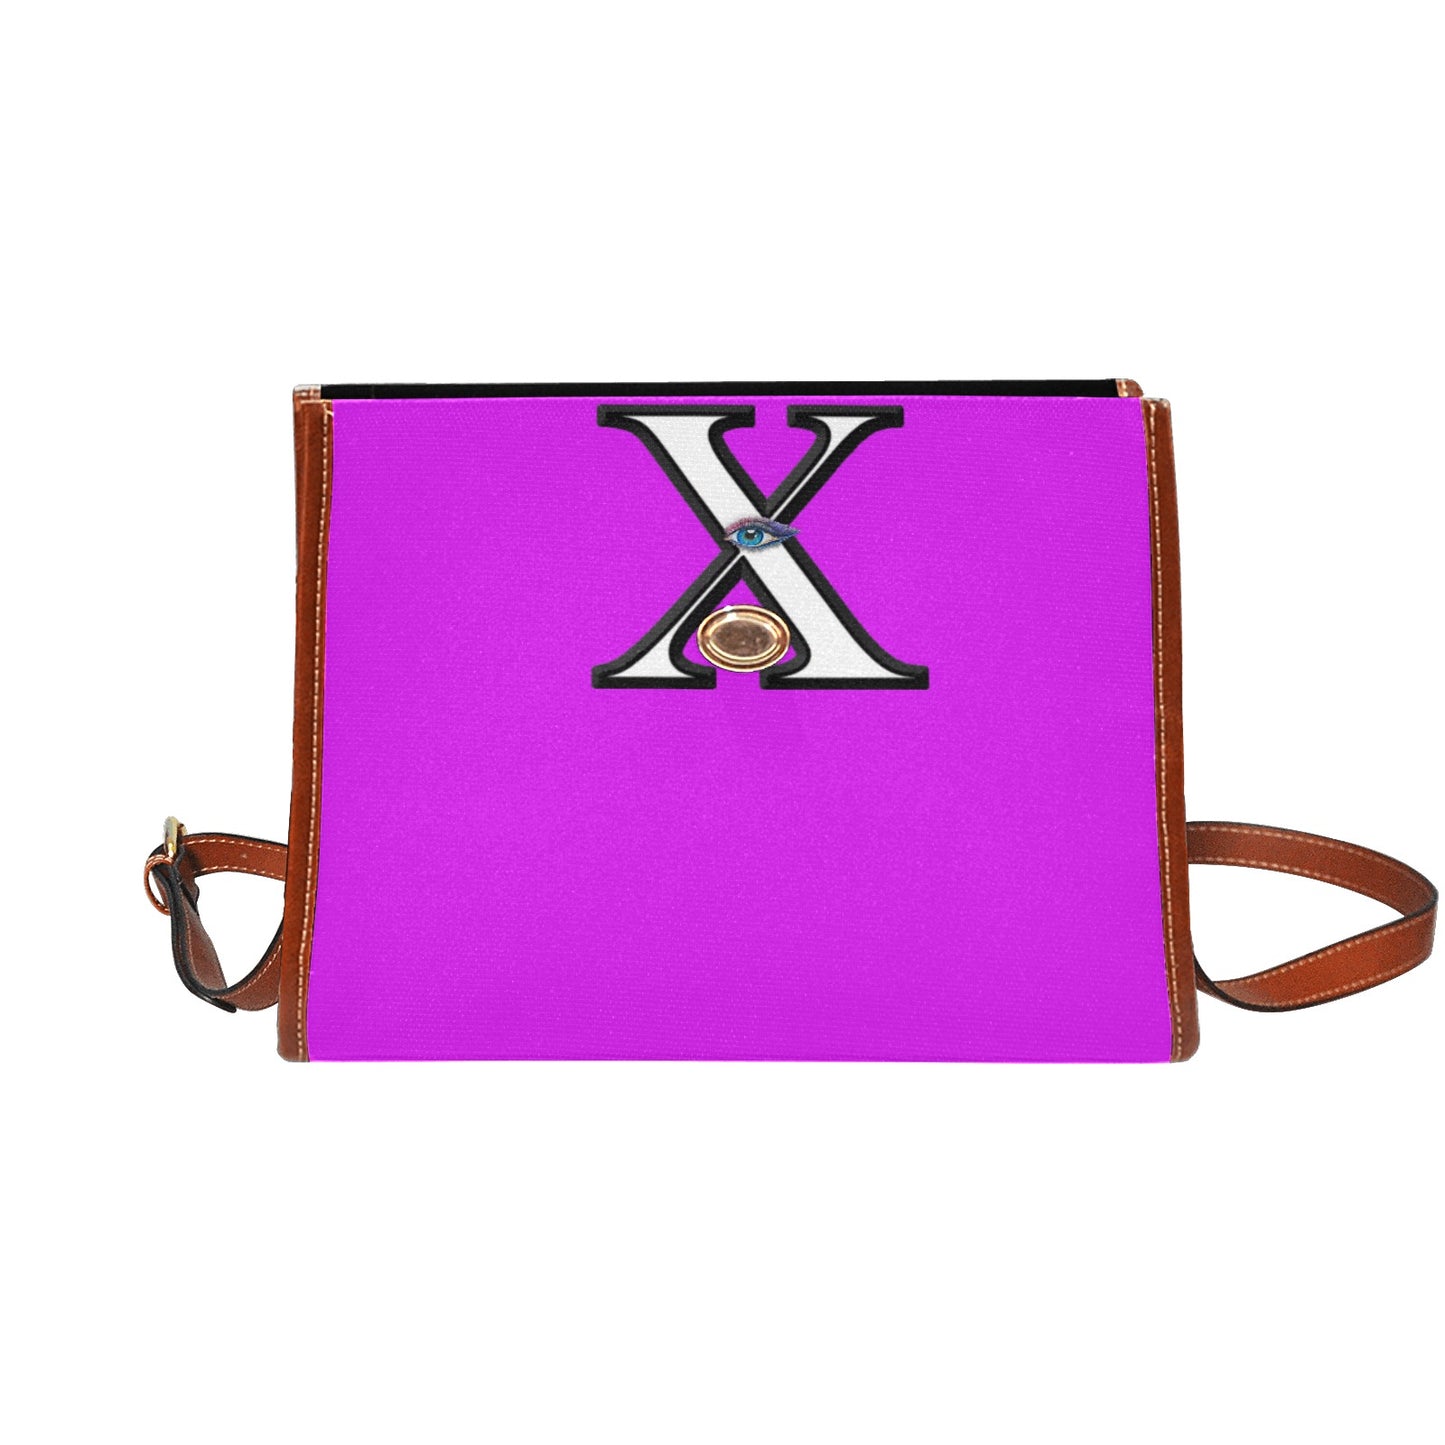 Xcarii Xii - Little Pink Waterproof Canvas Bag